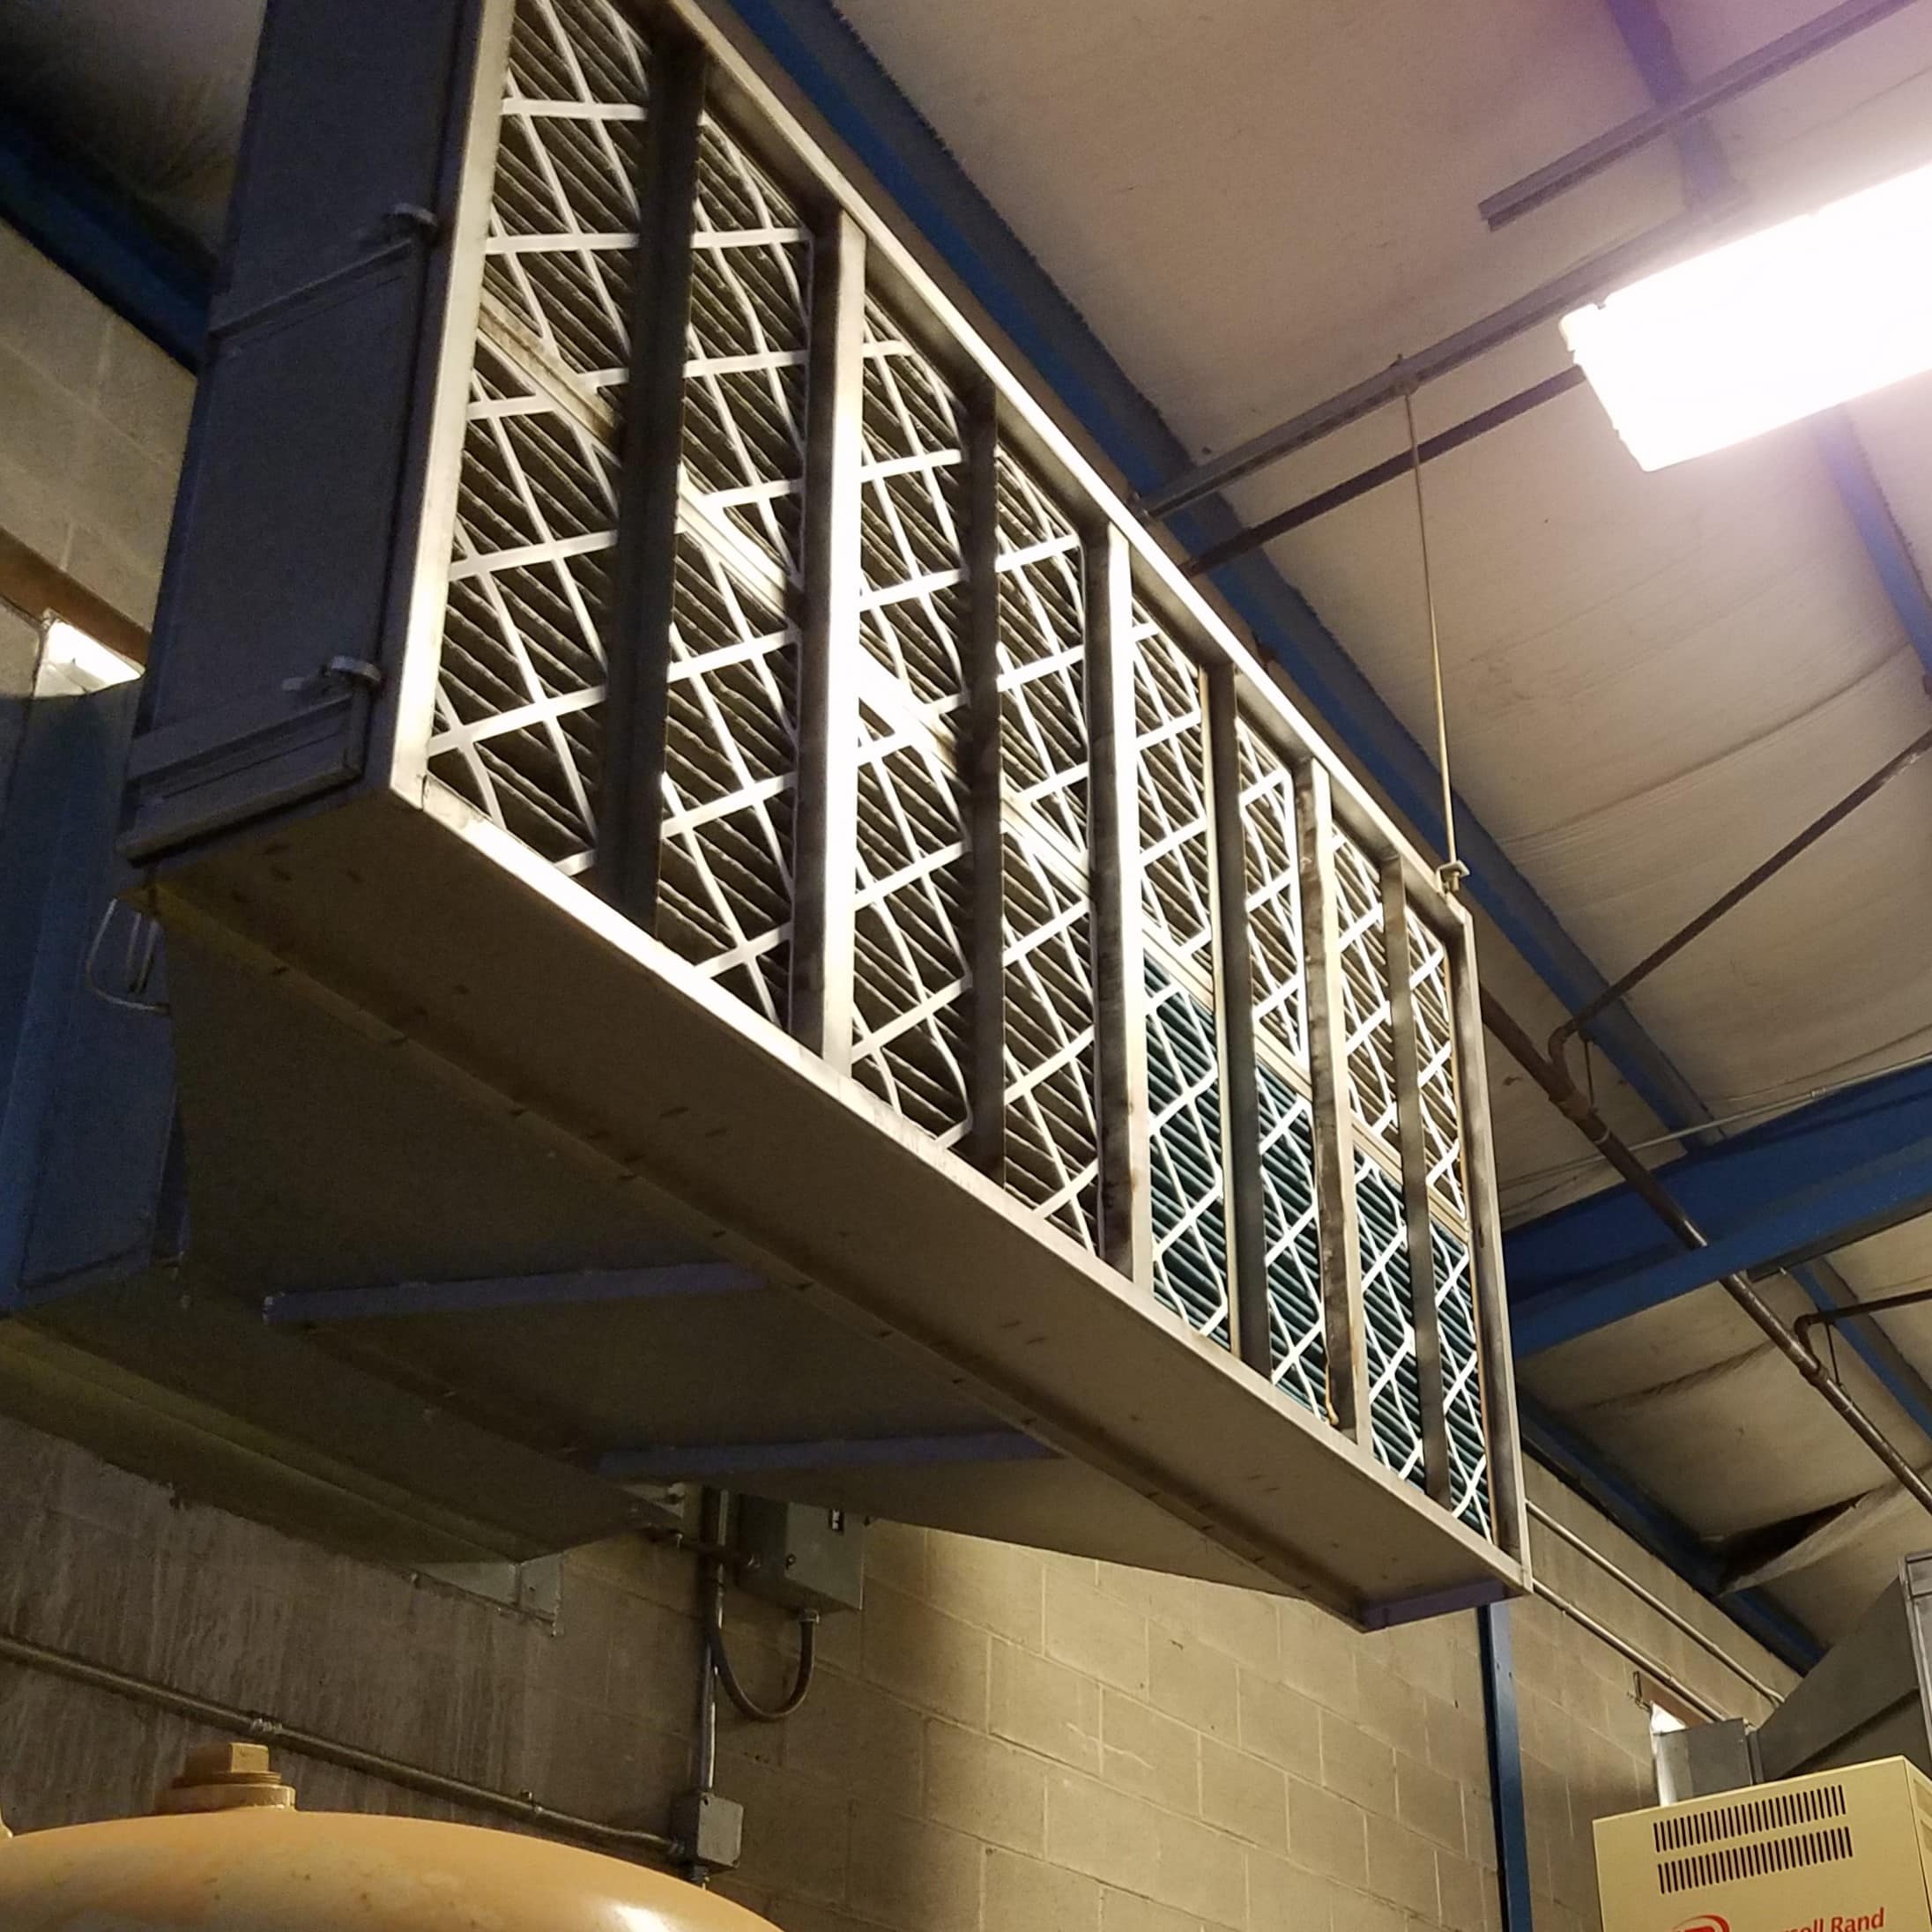 Intake air filter for a compressor room.